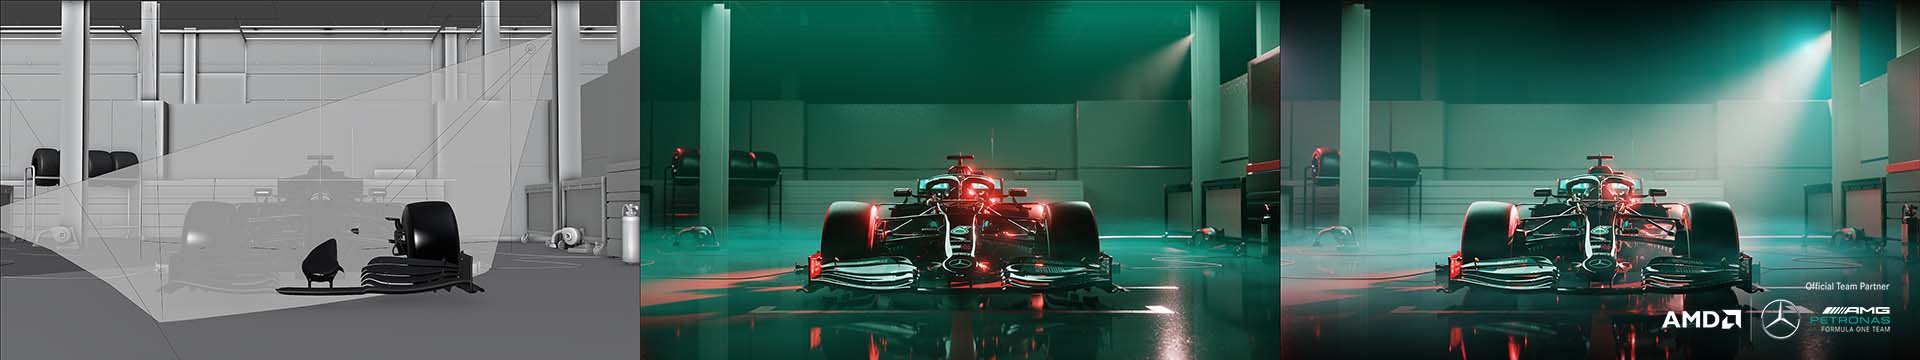 Mercedes-AMG F1 W12 AMD Radeon PRO + Blender animation Solid-Eevee-Cycles WEB